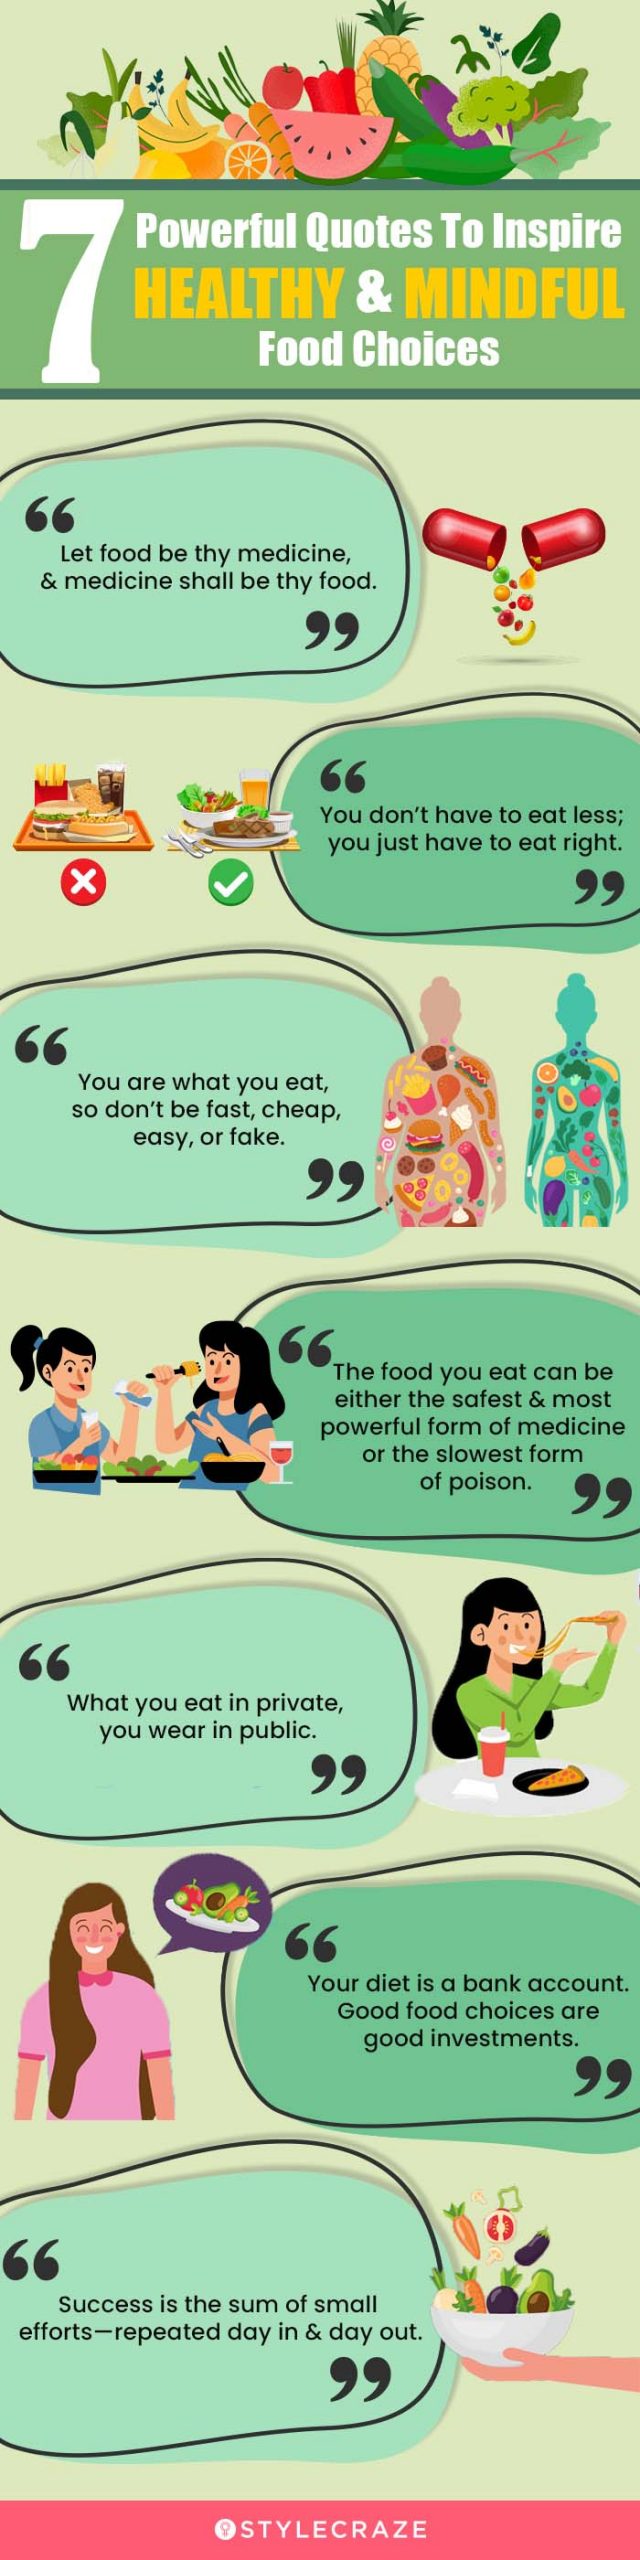 powerful quotes to inspire healthy and mindful food choices (infographic)